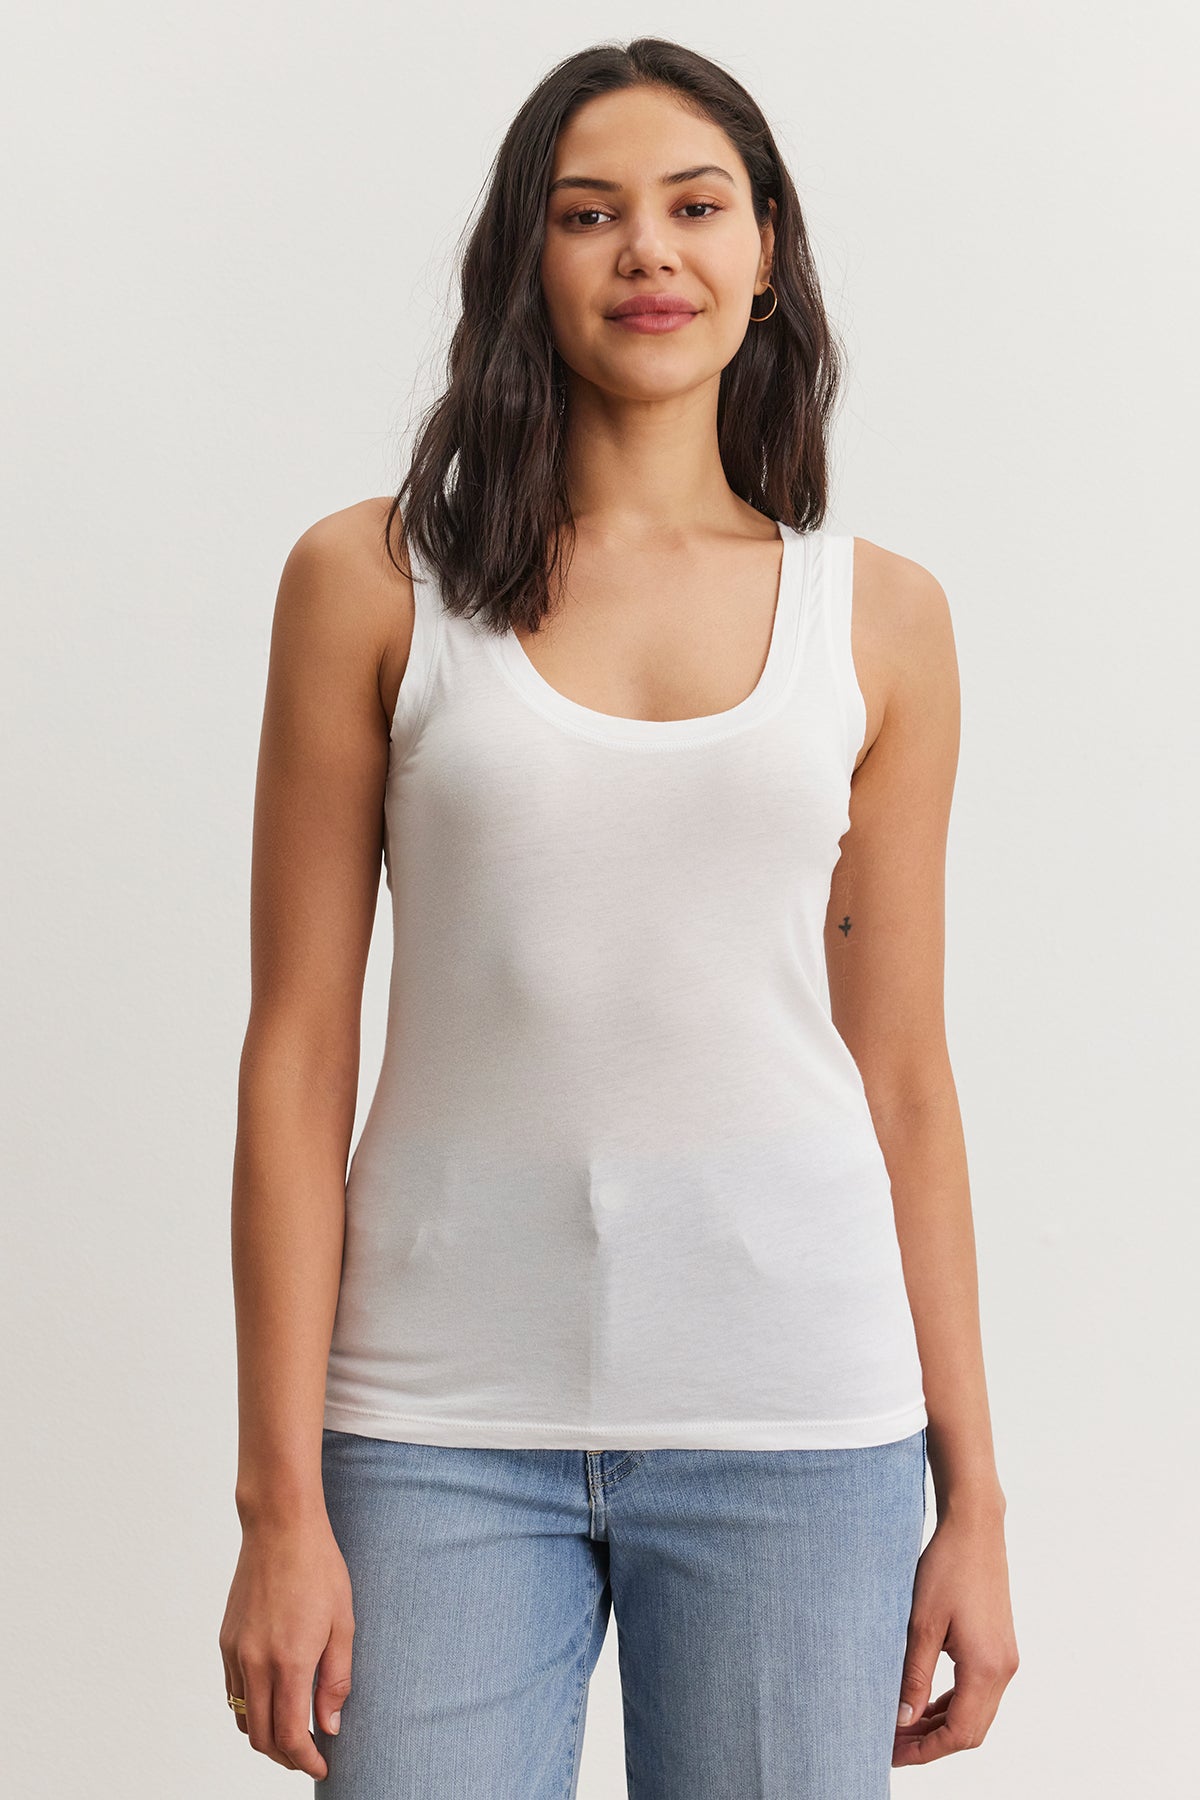   A person with shoulder-length dark hair is standing, wearing a fitted MOSSY TANK TOP by Velvet by Graham & Spencer and blue jeans, showcasing a versatile wardrobe against a plain white background. 